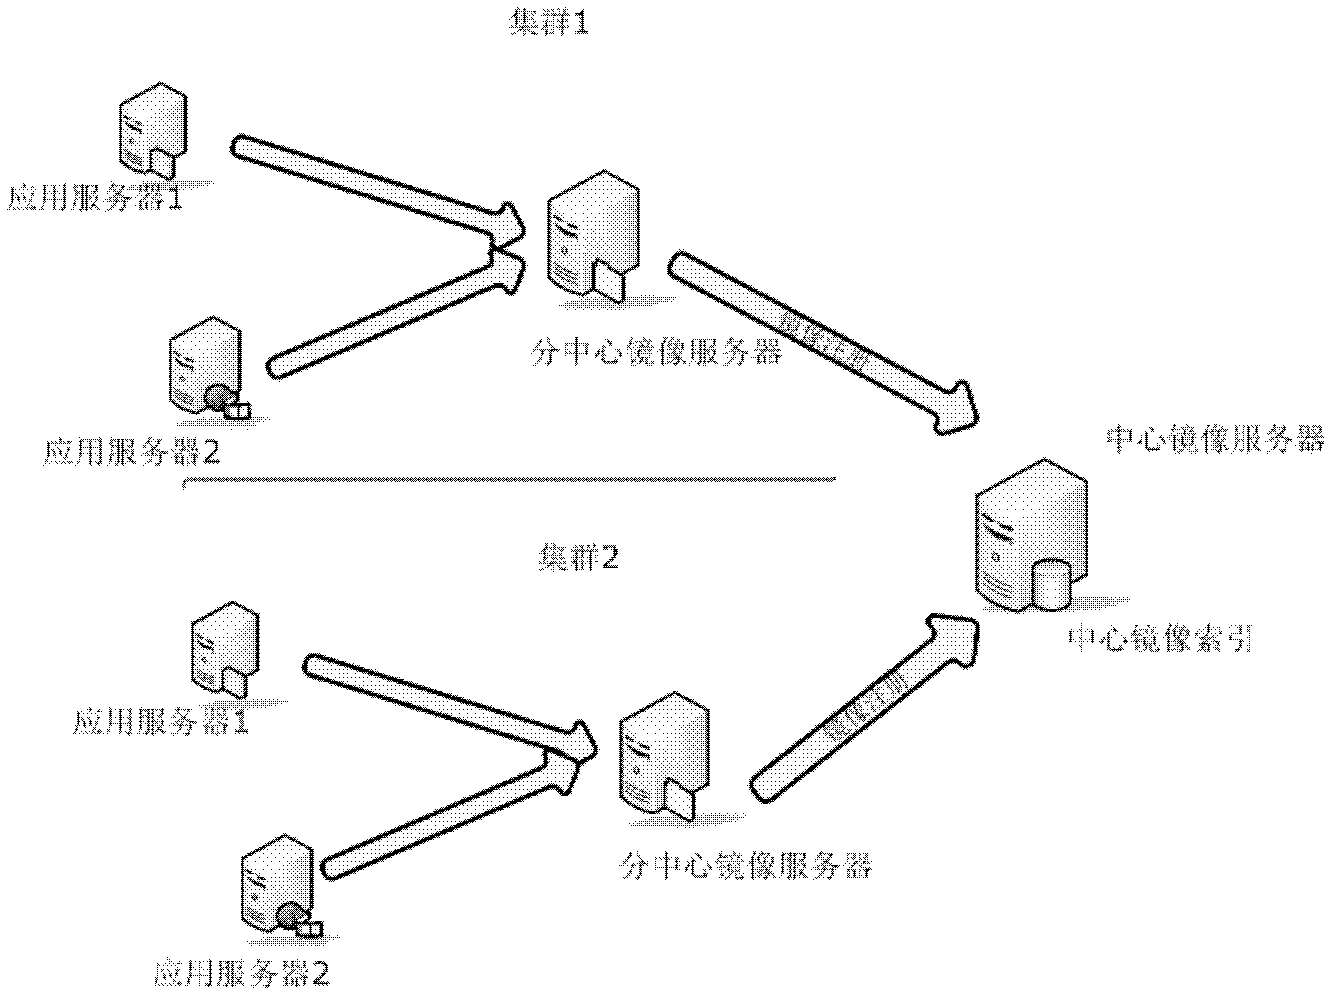 Semiautomatic batch deployment method for heterogeneous cluster operating system